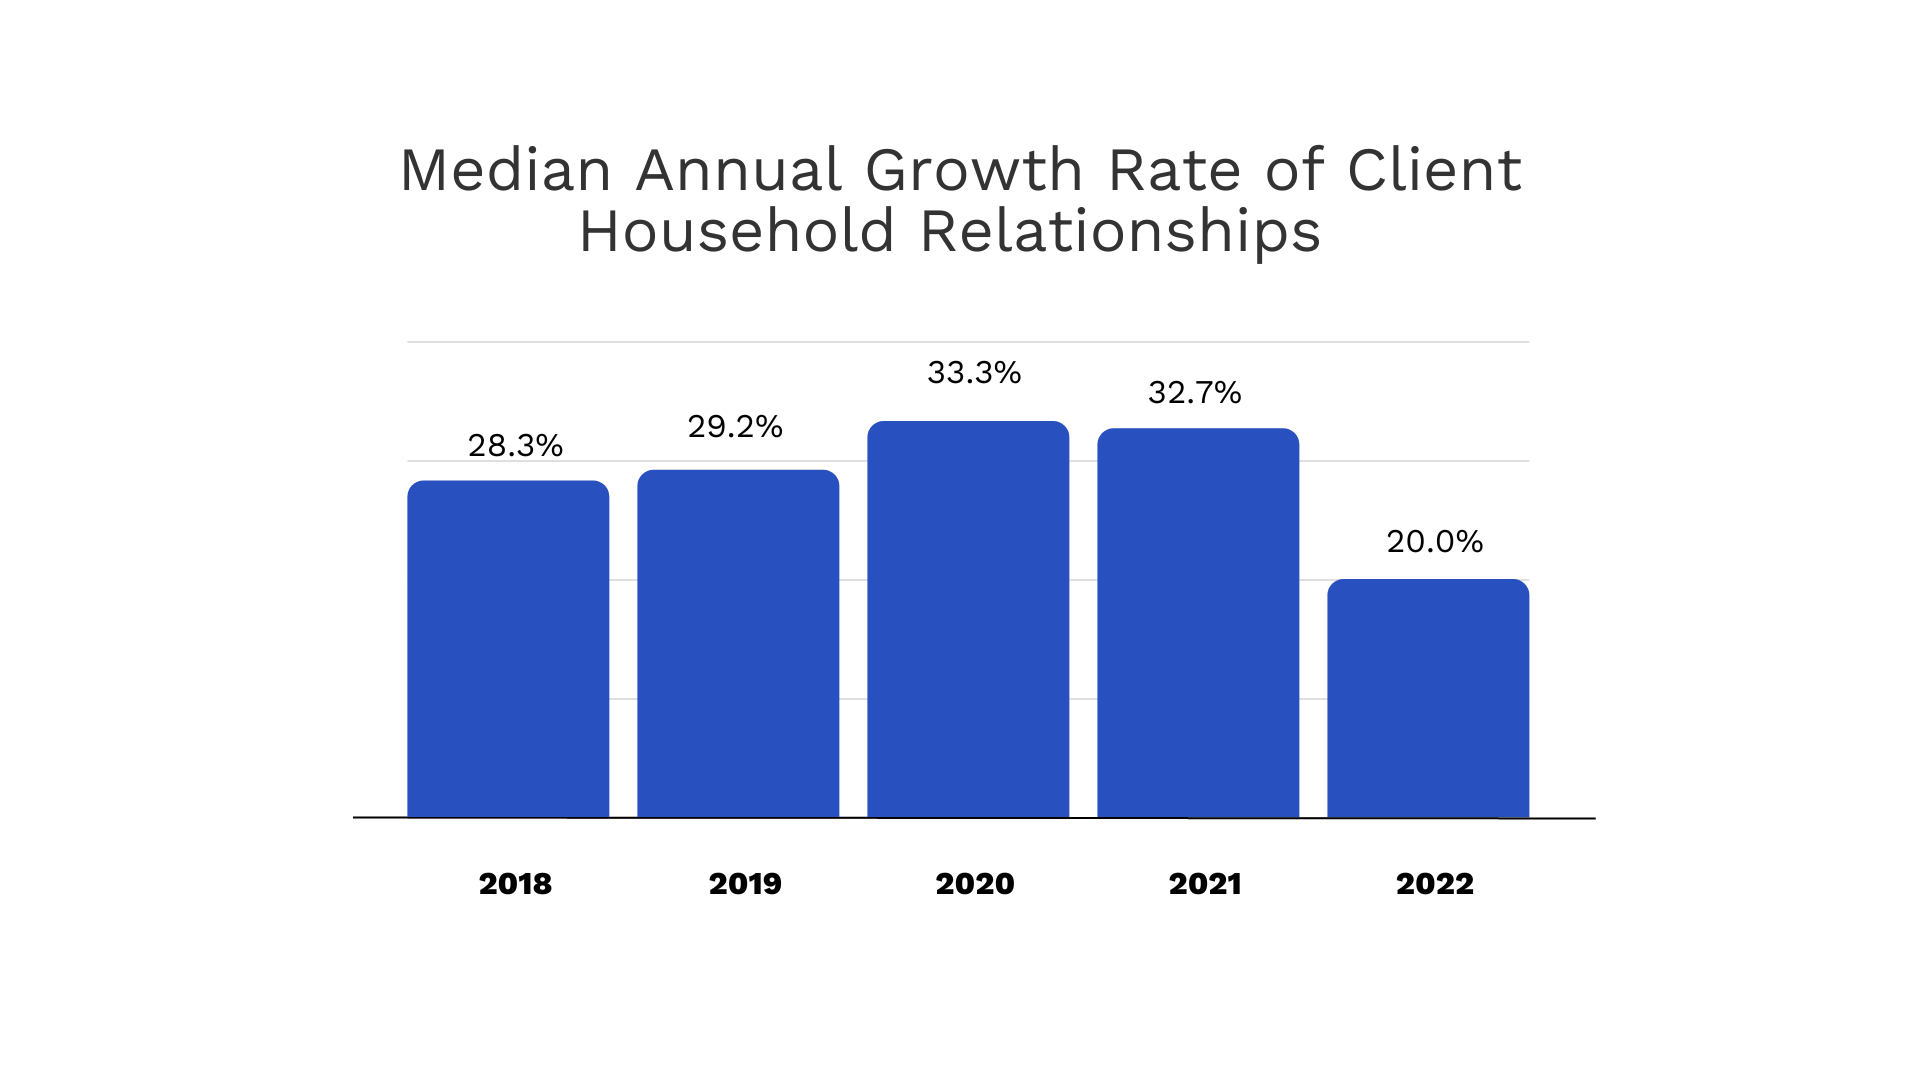 Median Annual Growth Rate of Client Household Relationships since 2018